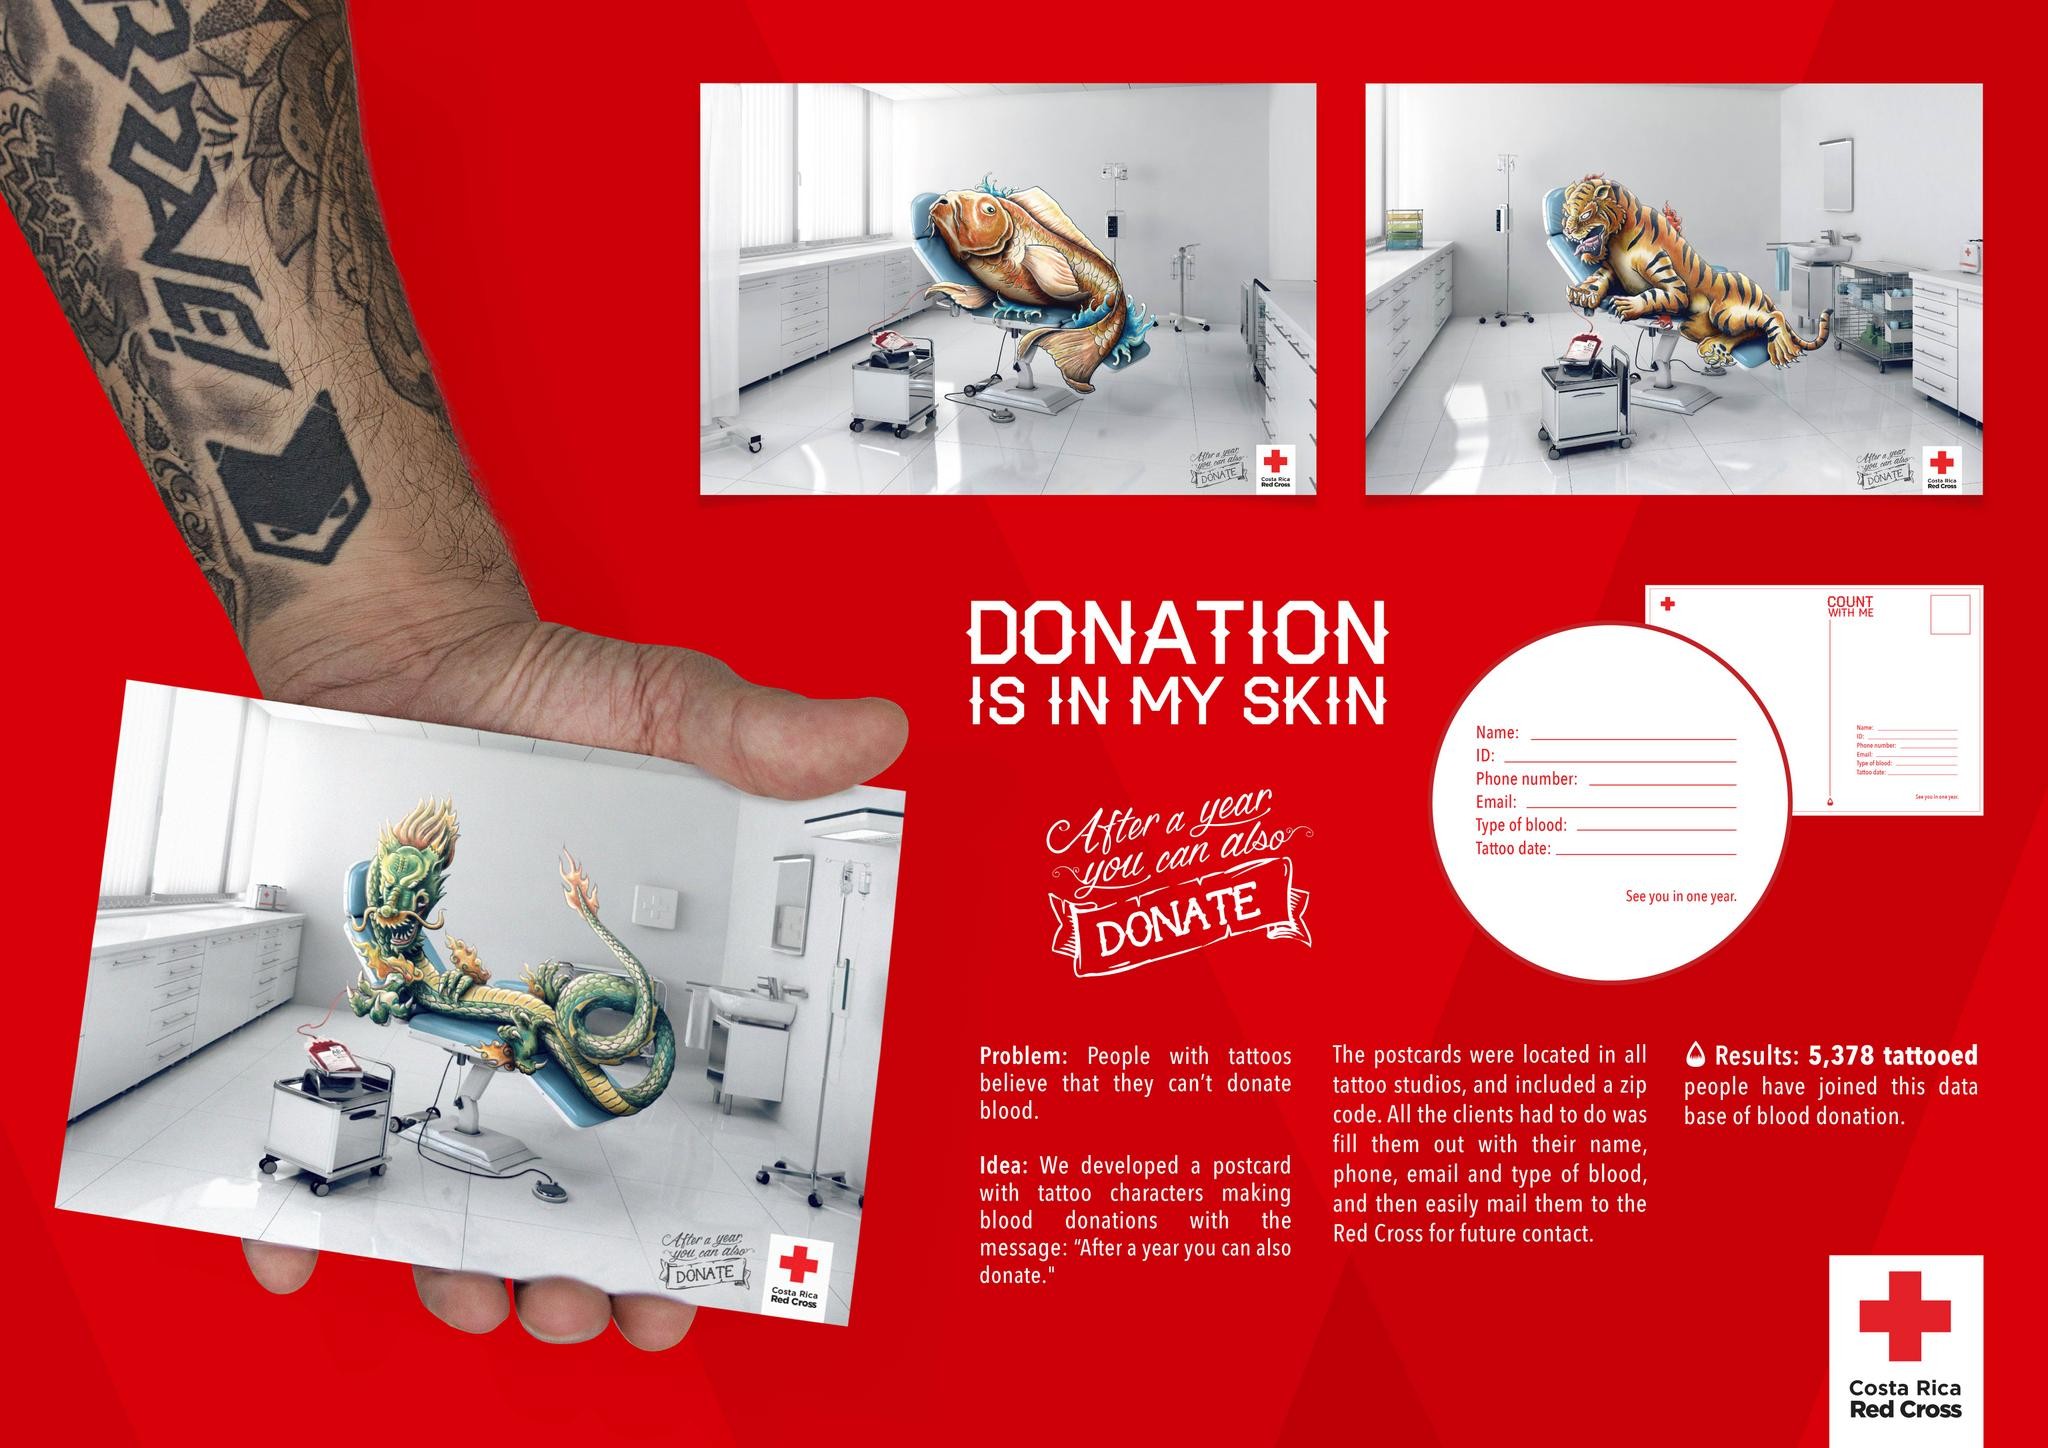 DONATION IS IN MY SKIN